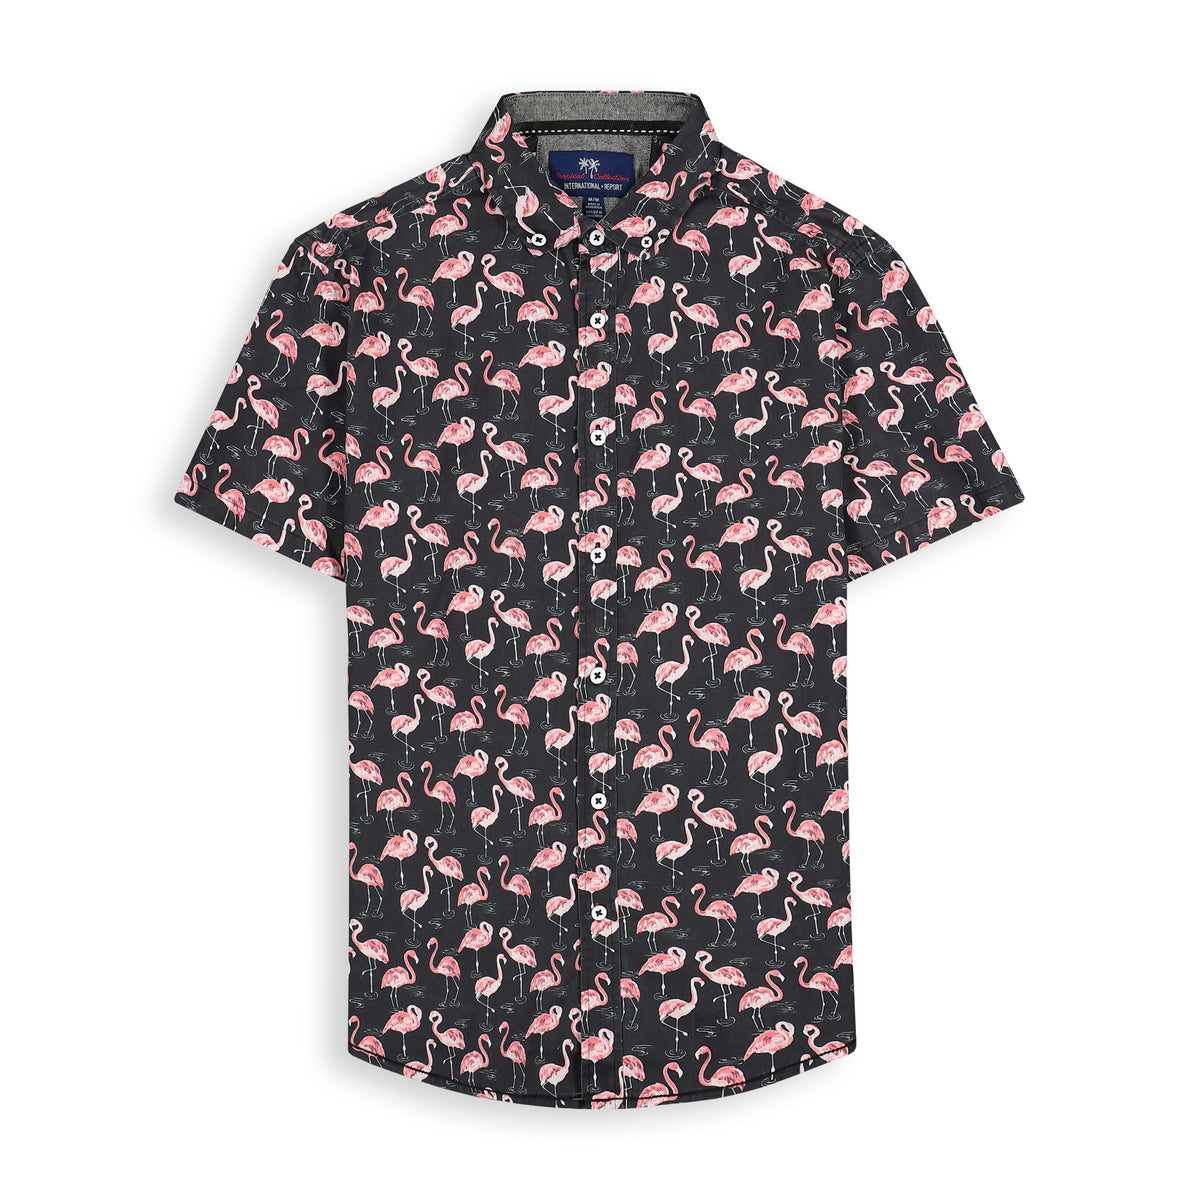 Front View of Short Sleeve Shirt with Flamingo Print in Black